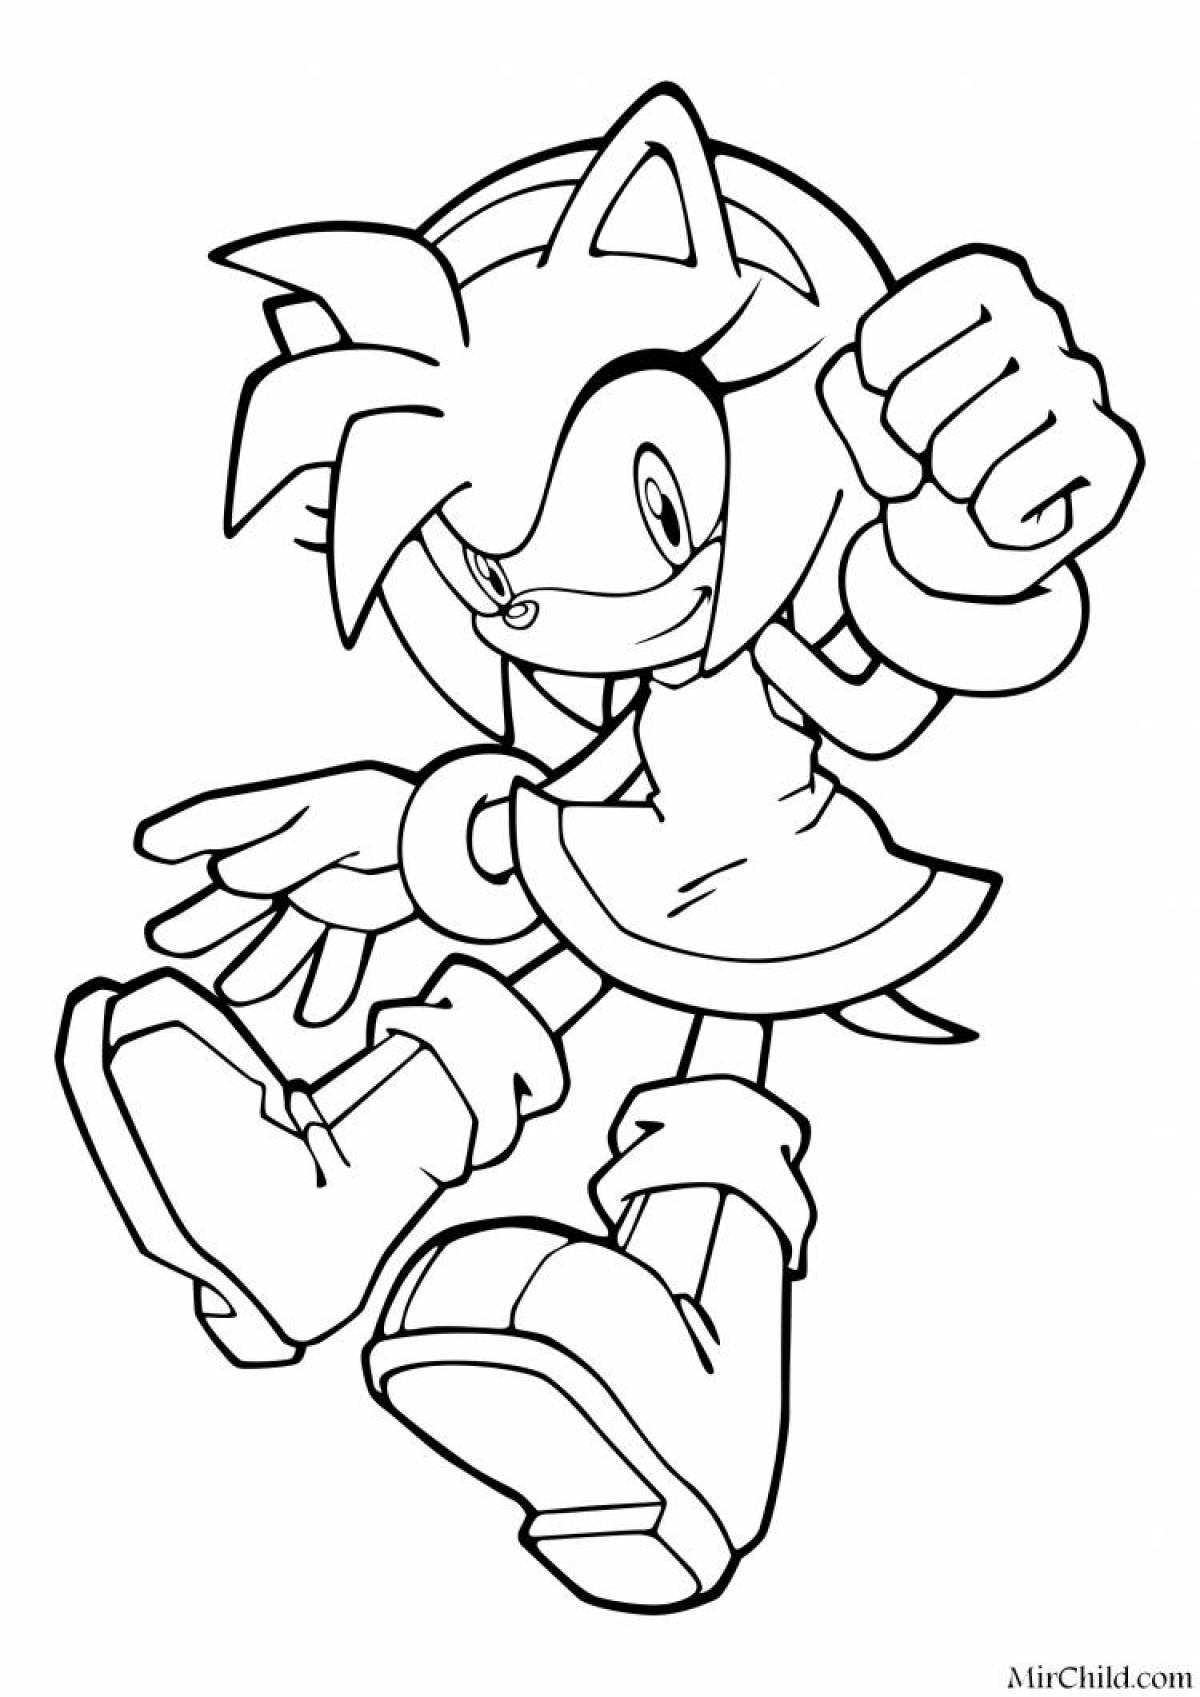 Coloring book glowing amy rose